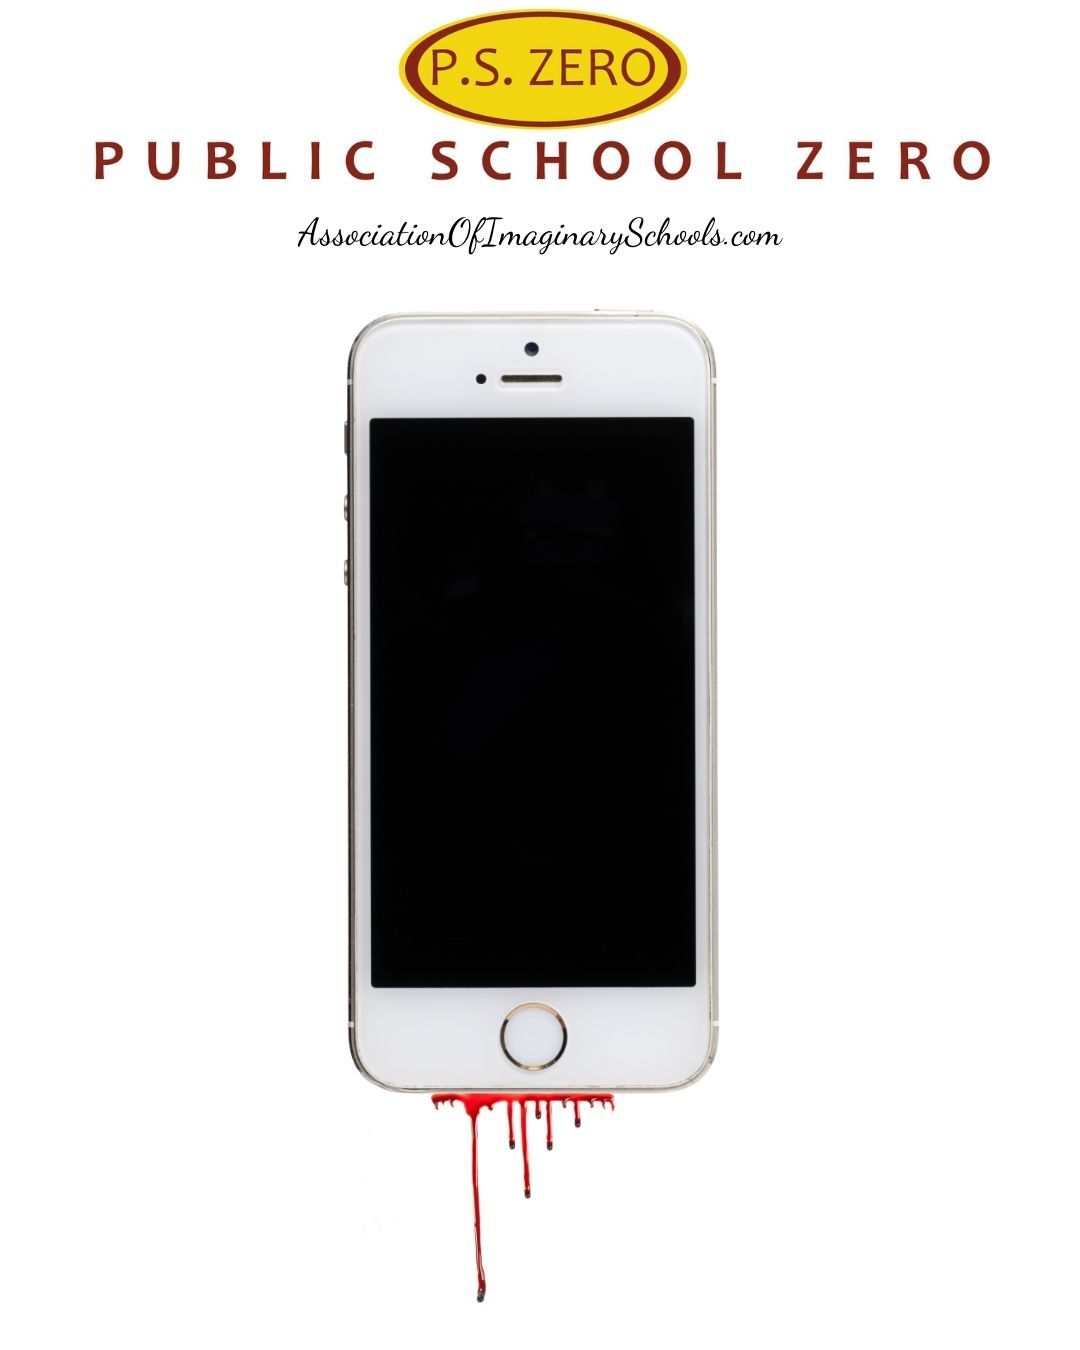 Friday Admin Poem: Your Phone Bleeds For You